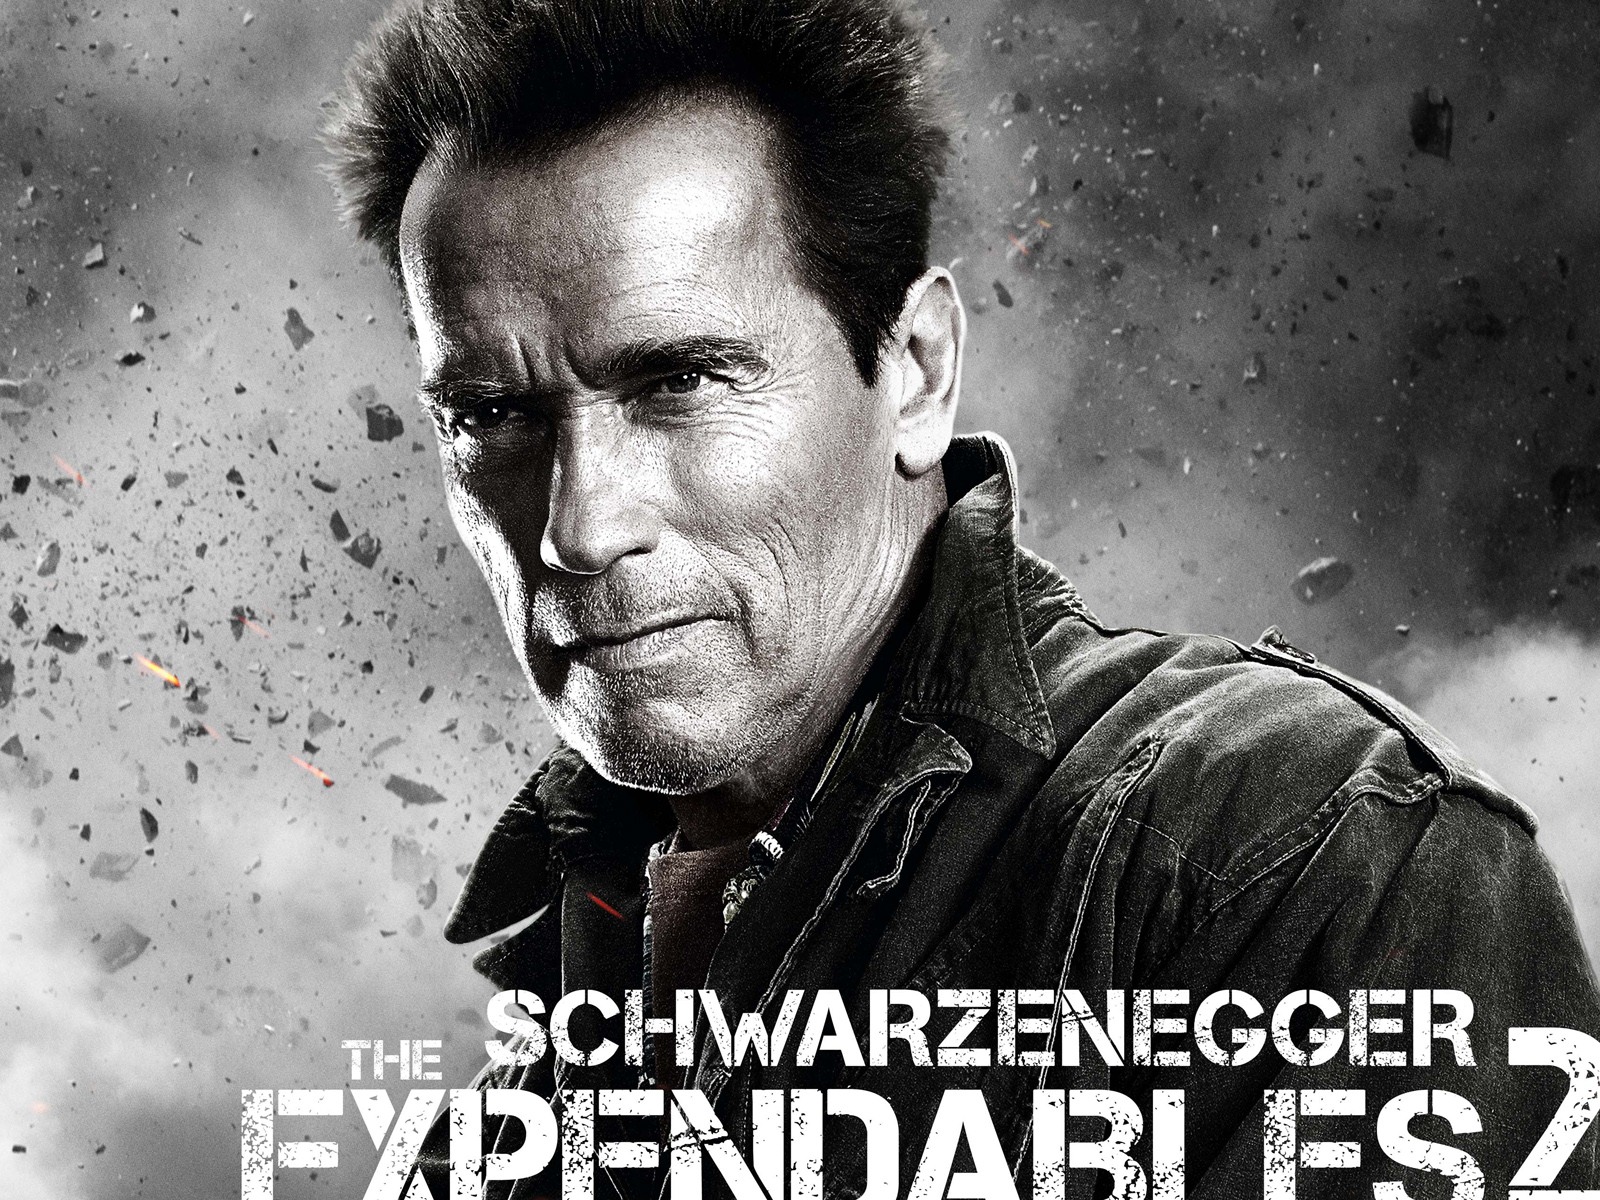 2012 Expendables2 HDの壁紙 #4 - 1600x1200